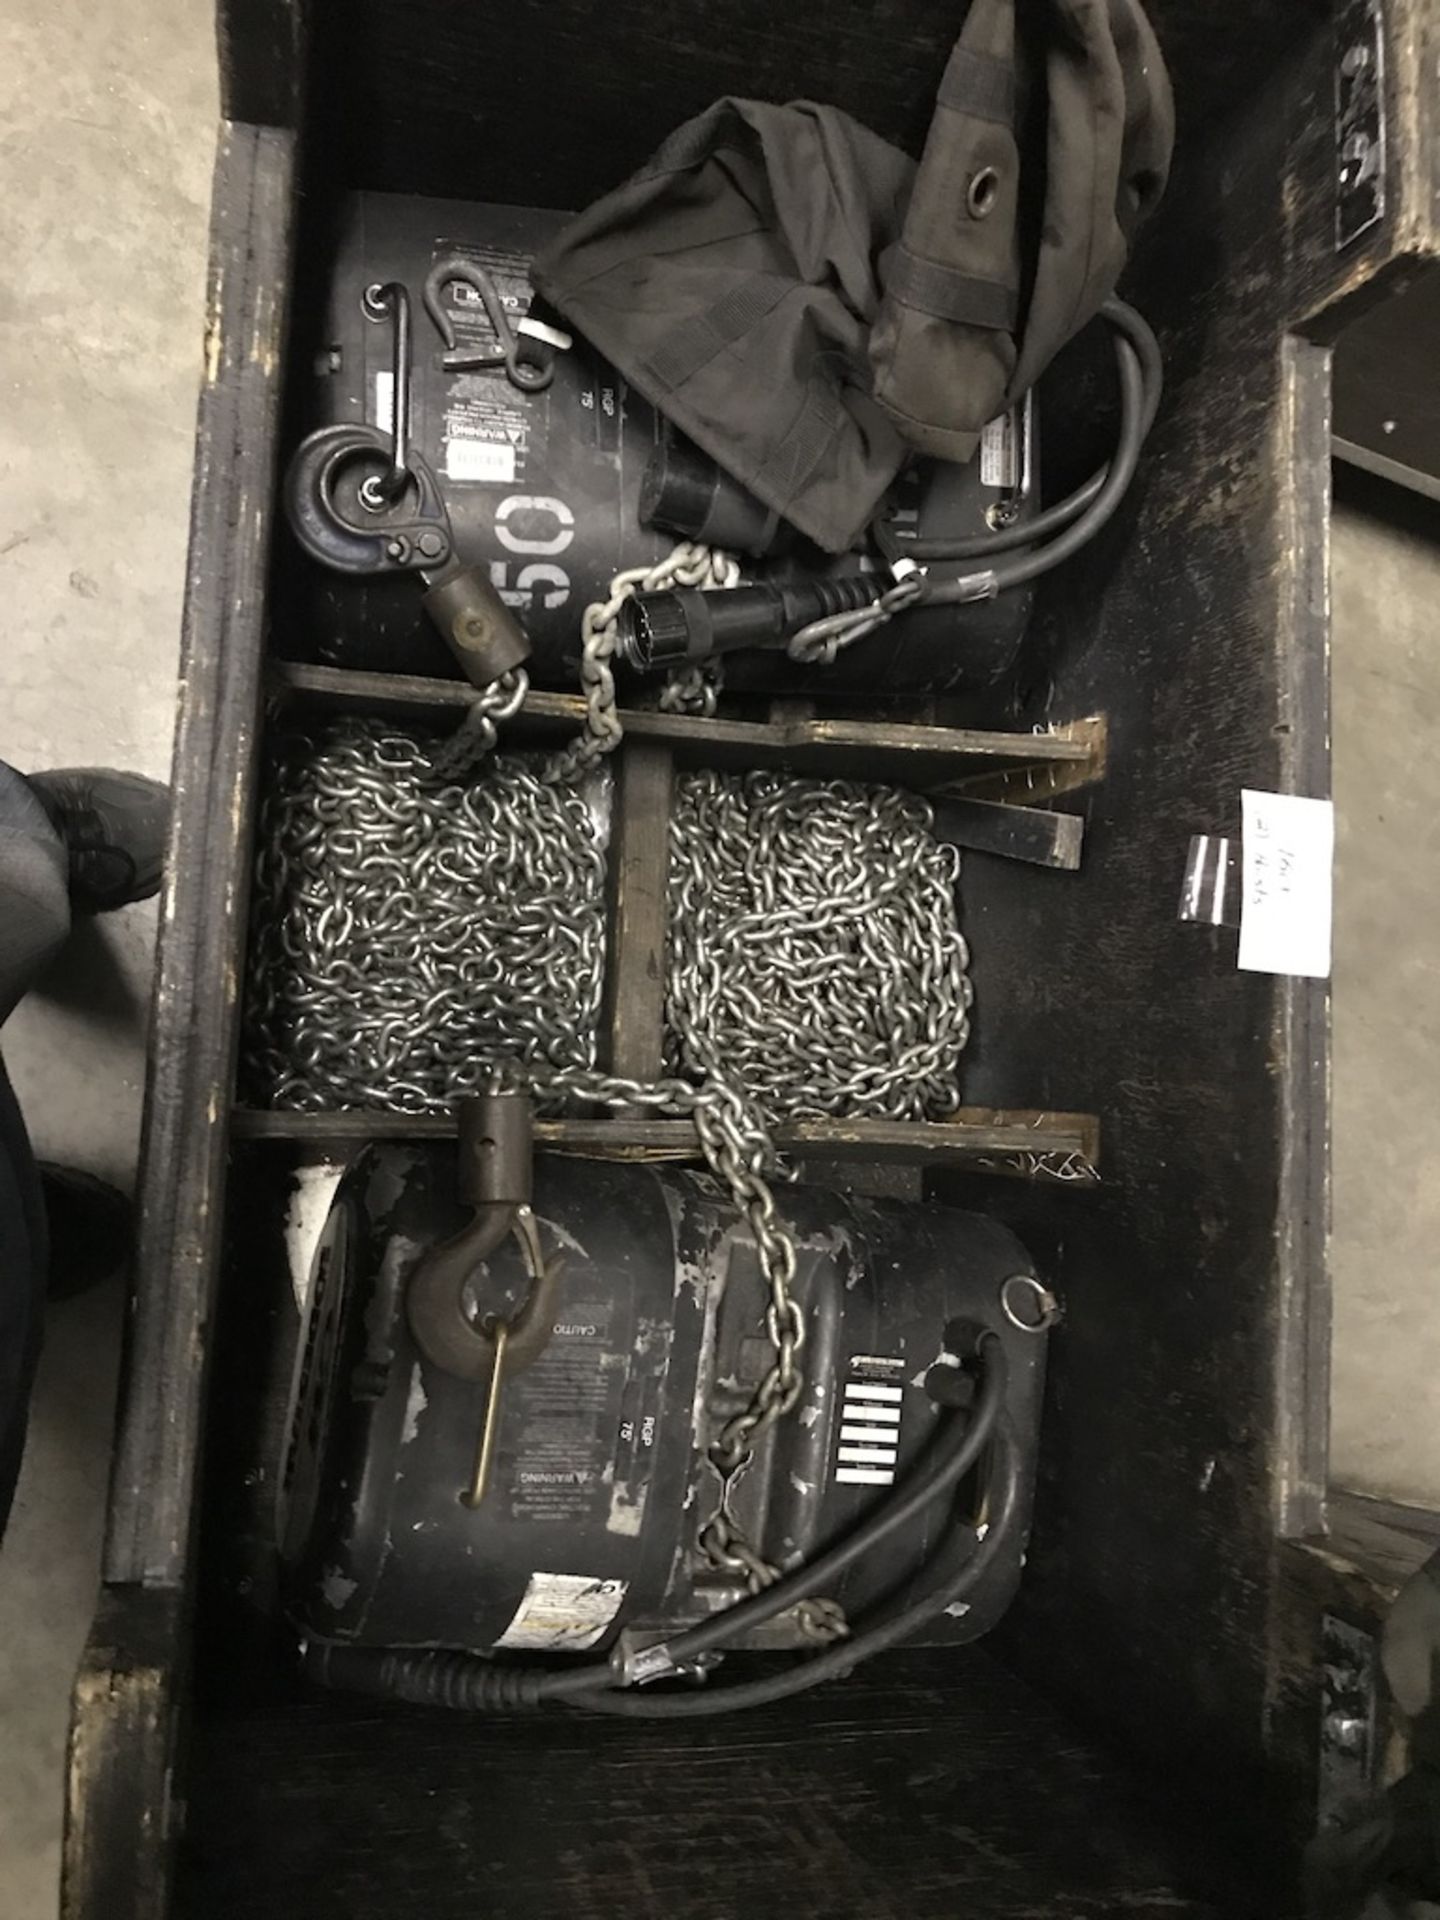 LOT OF: (2) ATLANTA RIGGING SYSTEMS LODESTAR ELECTRIC CHAIN HOISTS W/ 75' OF CHAIN IN BOX - Image 2 of 5